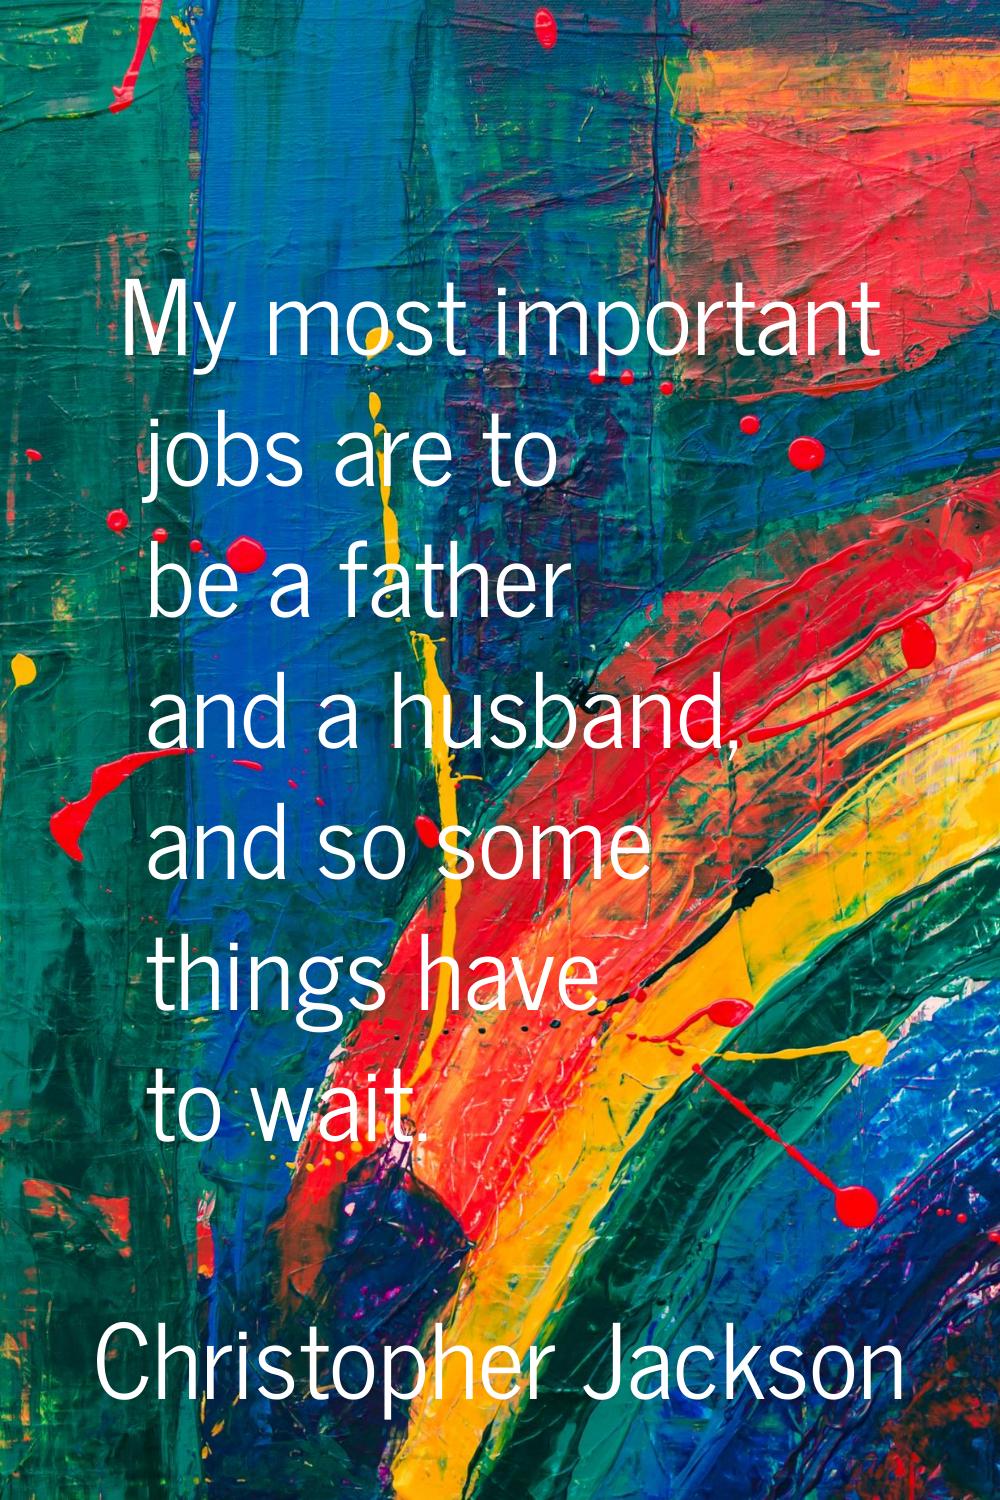 My most important jobs are to be a father and a husband, and so some things have to wait.